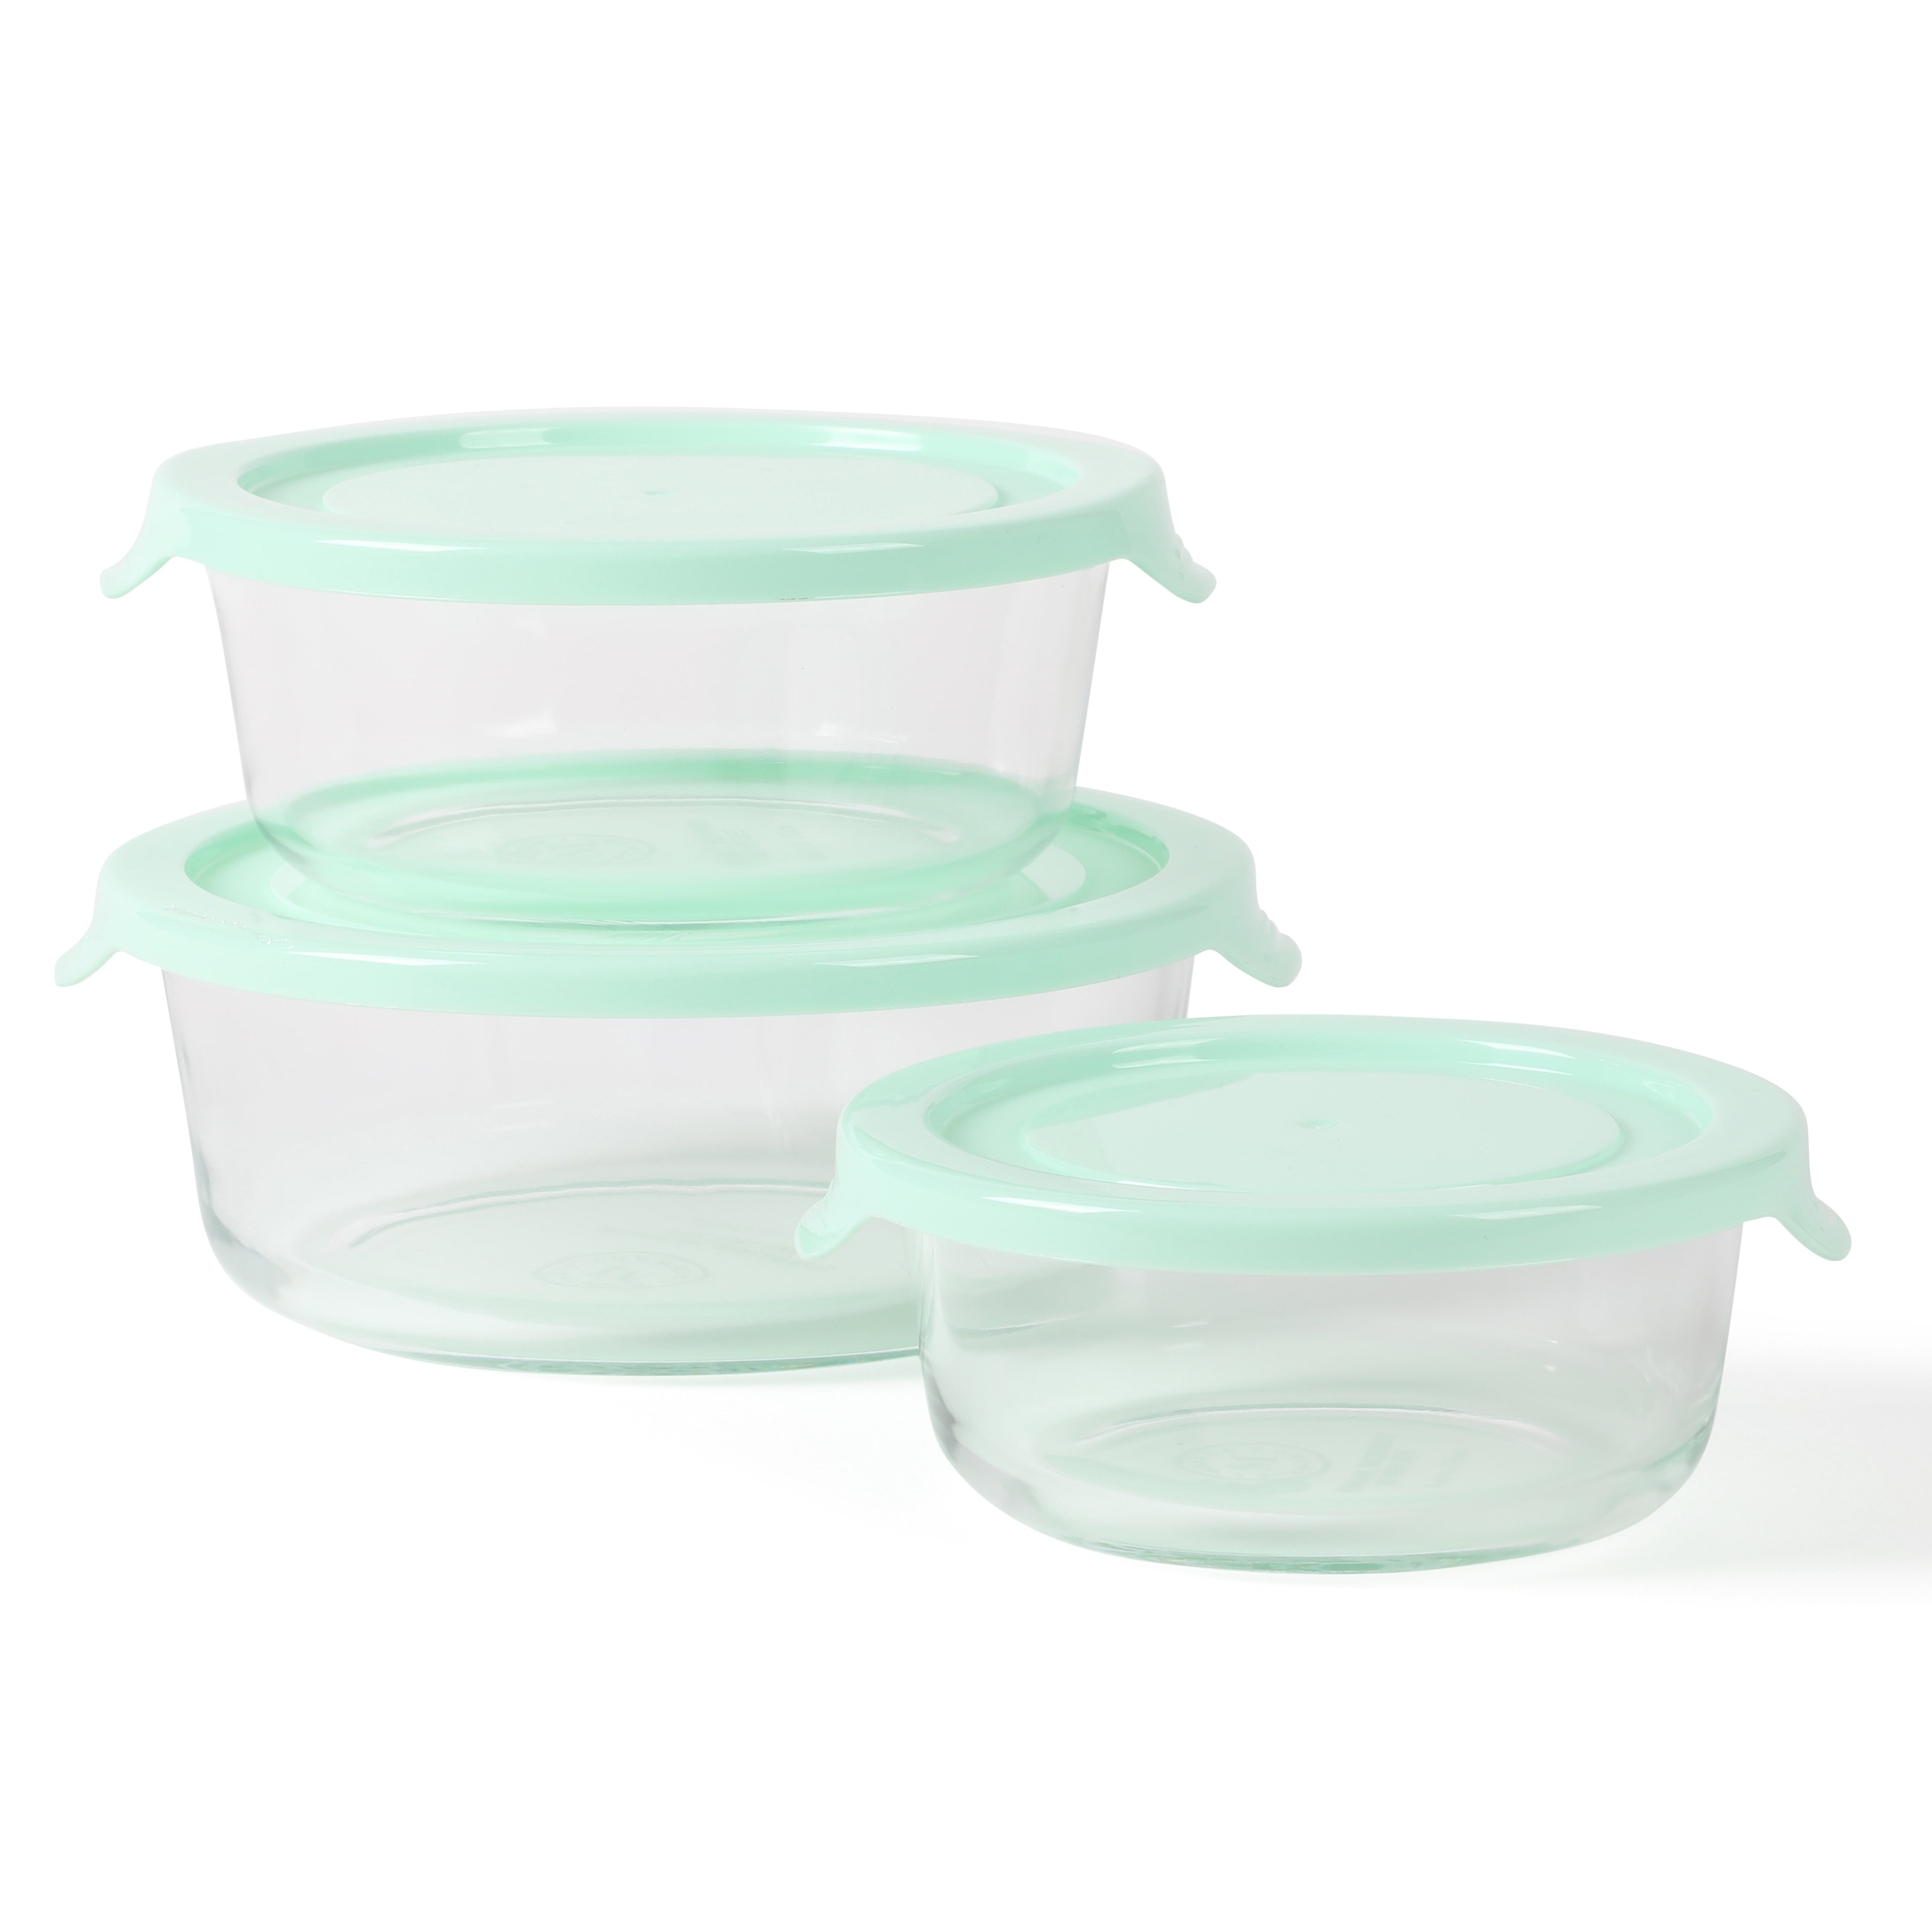 6-Piece Food Storage Containers with Lids Set